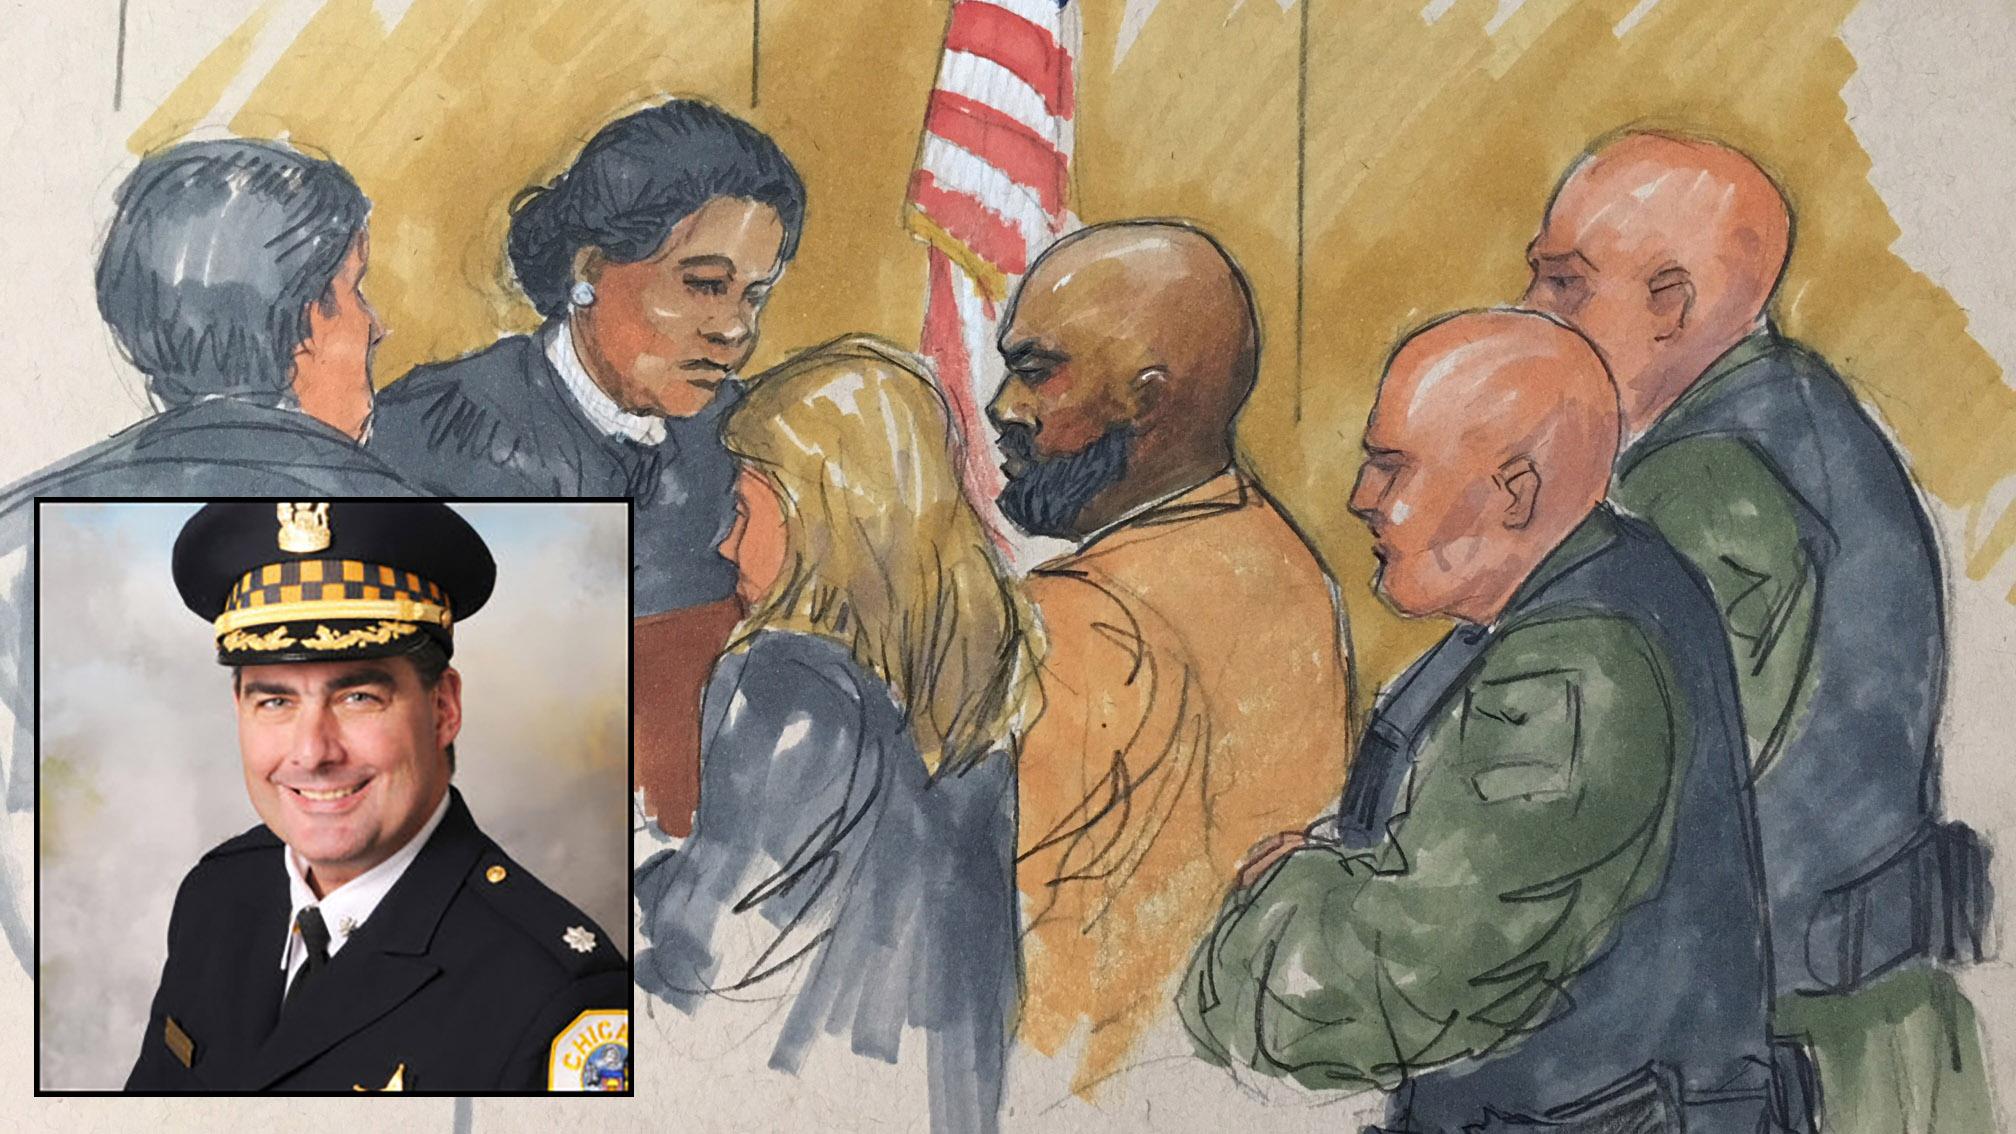 Shomari Legghette, center, appears before Cook County Judge Erica Reddick on Monday, March 12, 2018. (Courtroom sketch by Thomas Gianni). Inset: Chicago Police Cmdr. Paul Bauer.